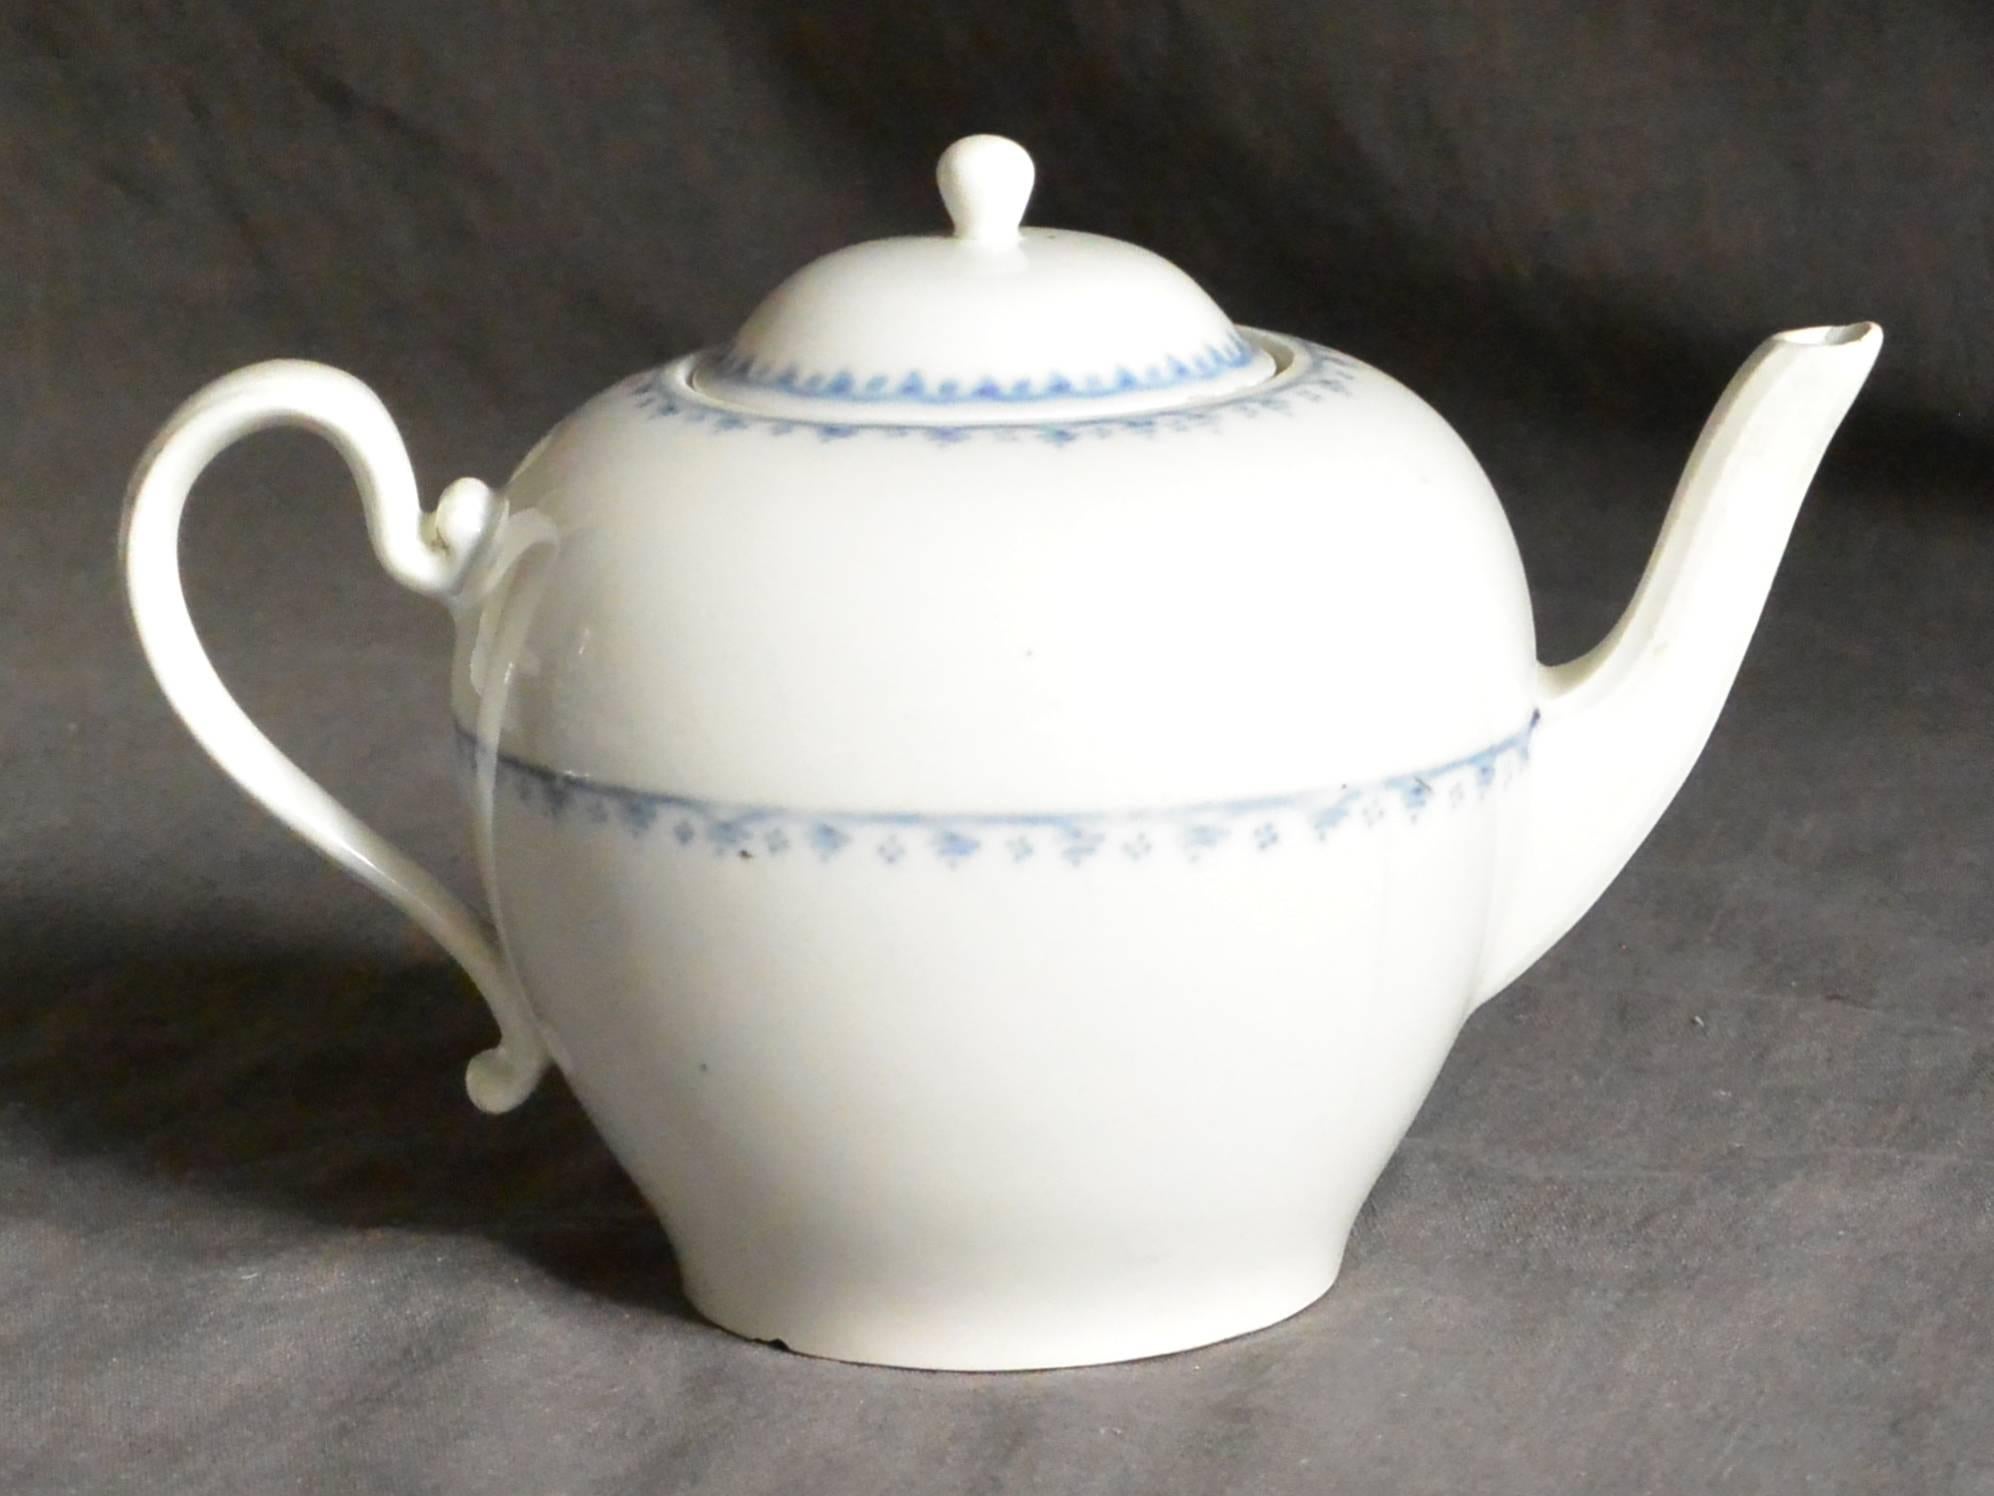 Blue and white Vienna porcelain teapot.  White porcelain teapot with delicate blue banding. Underglaze blue marking for Vienna; impressed 